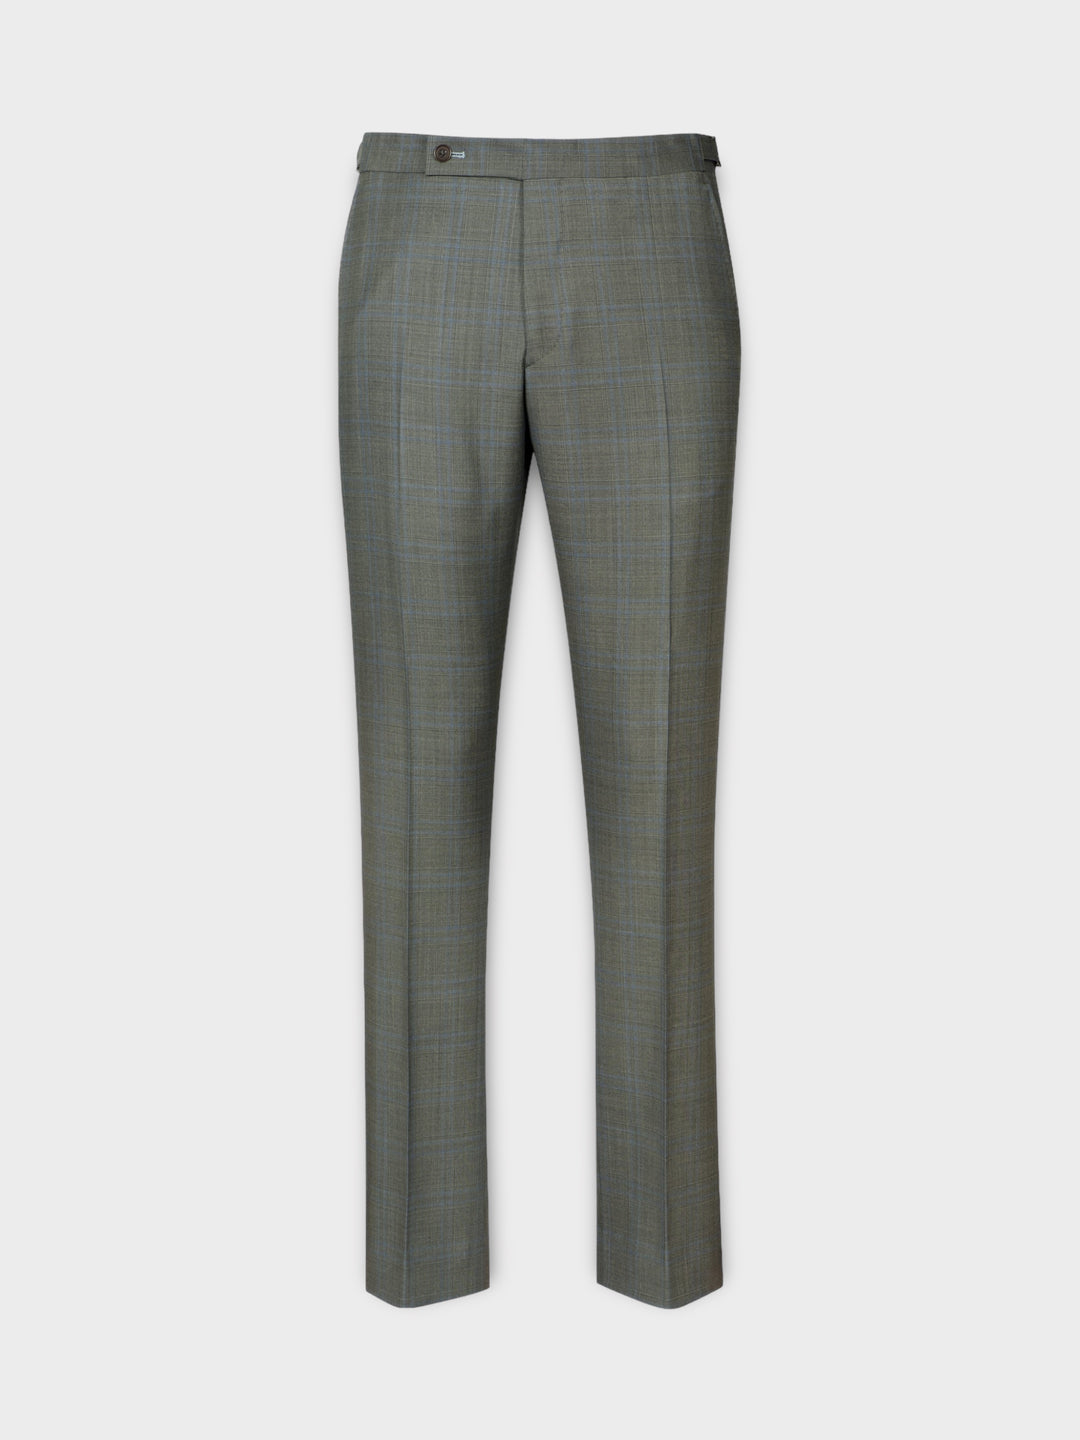 Light Grey Prince of Wales Suit